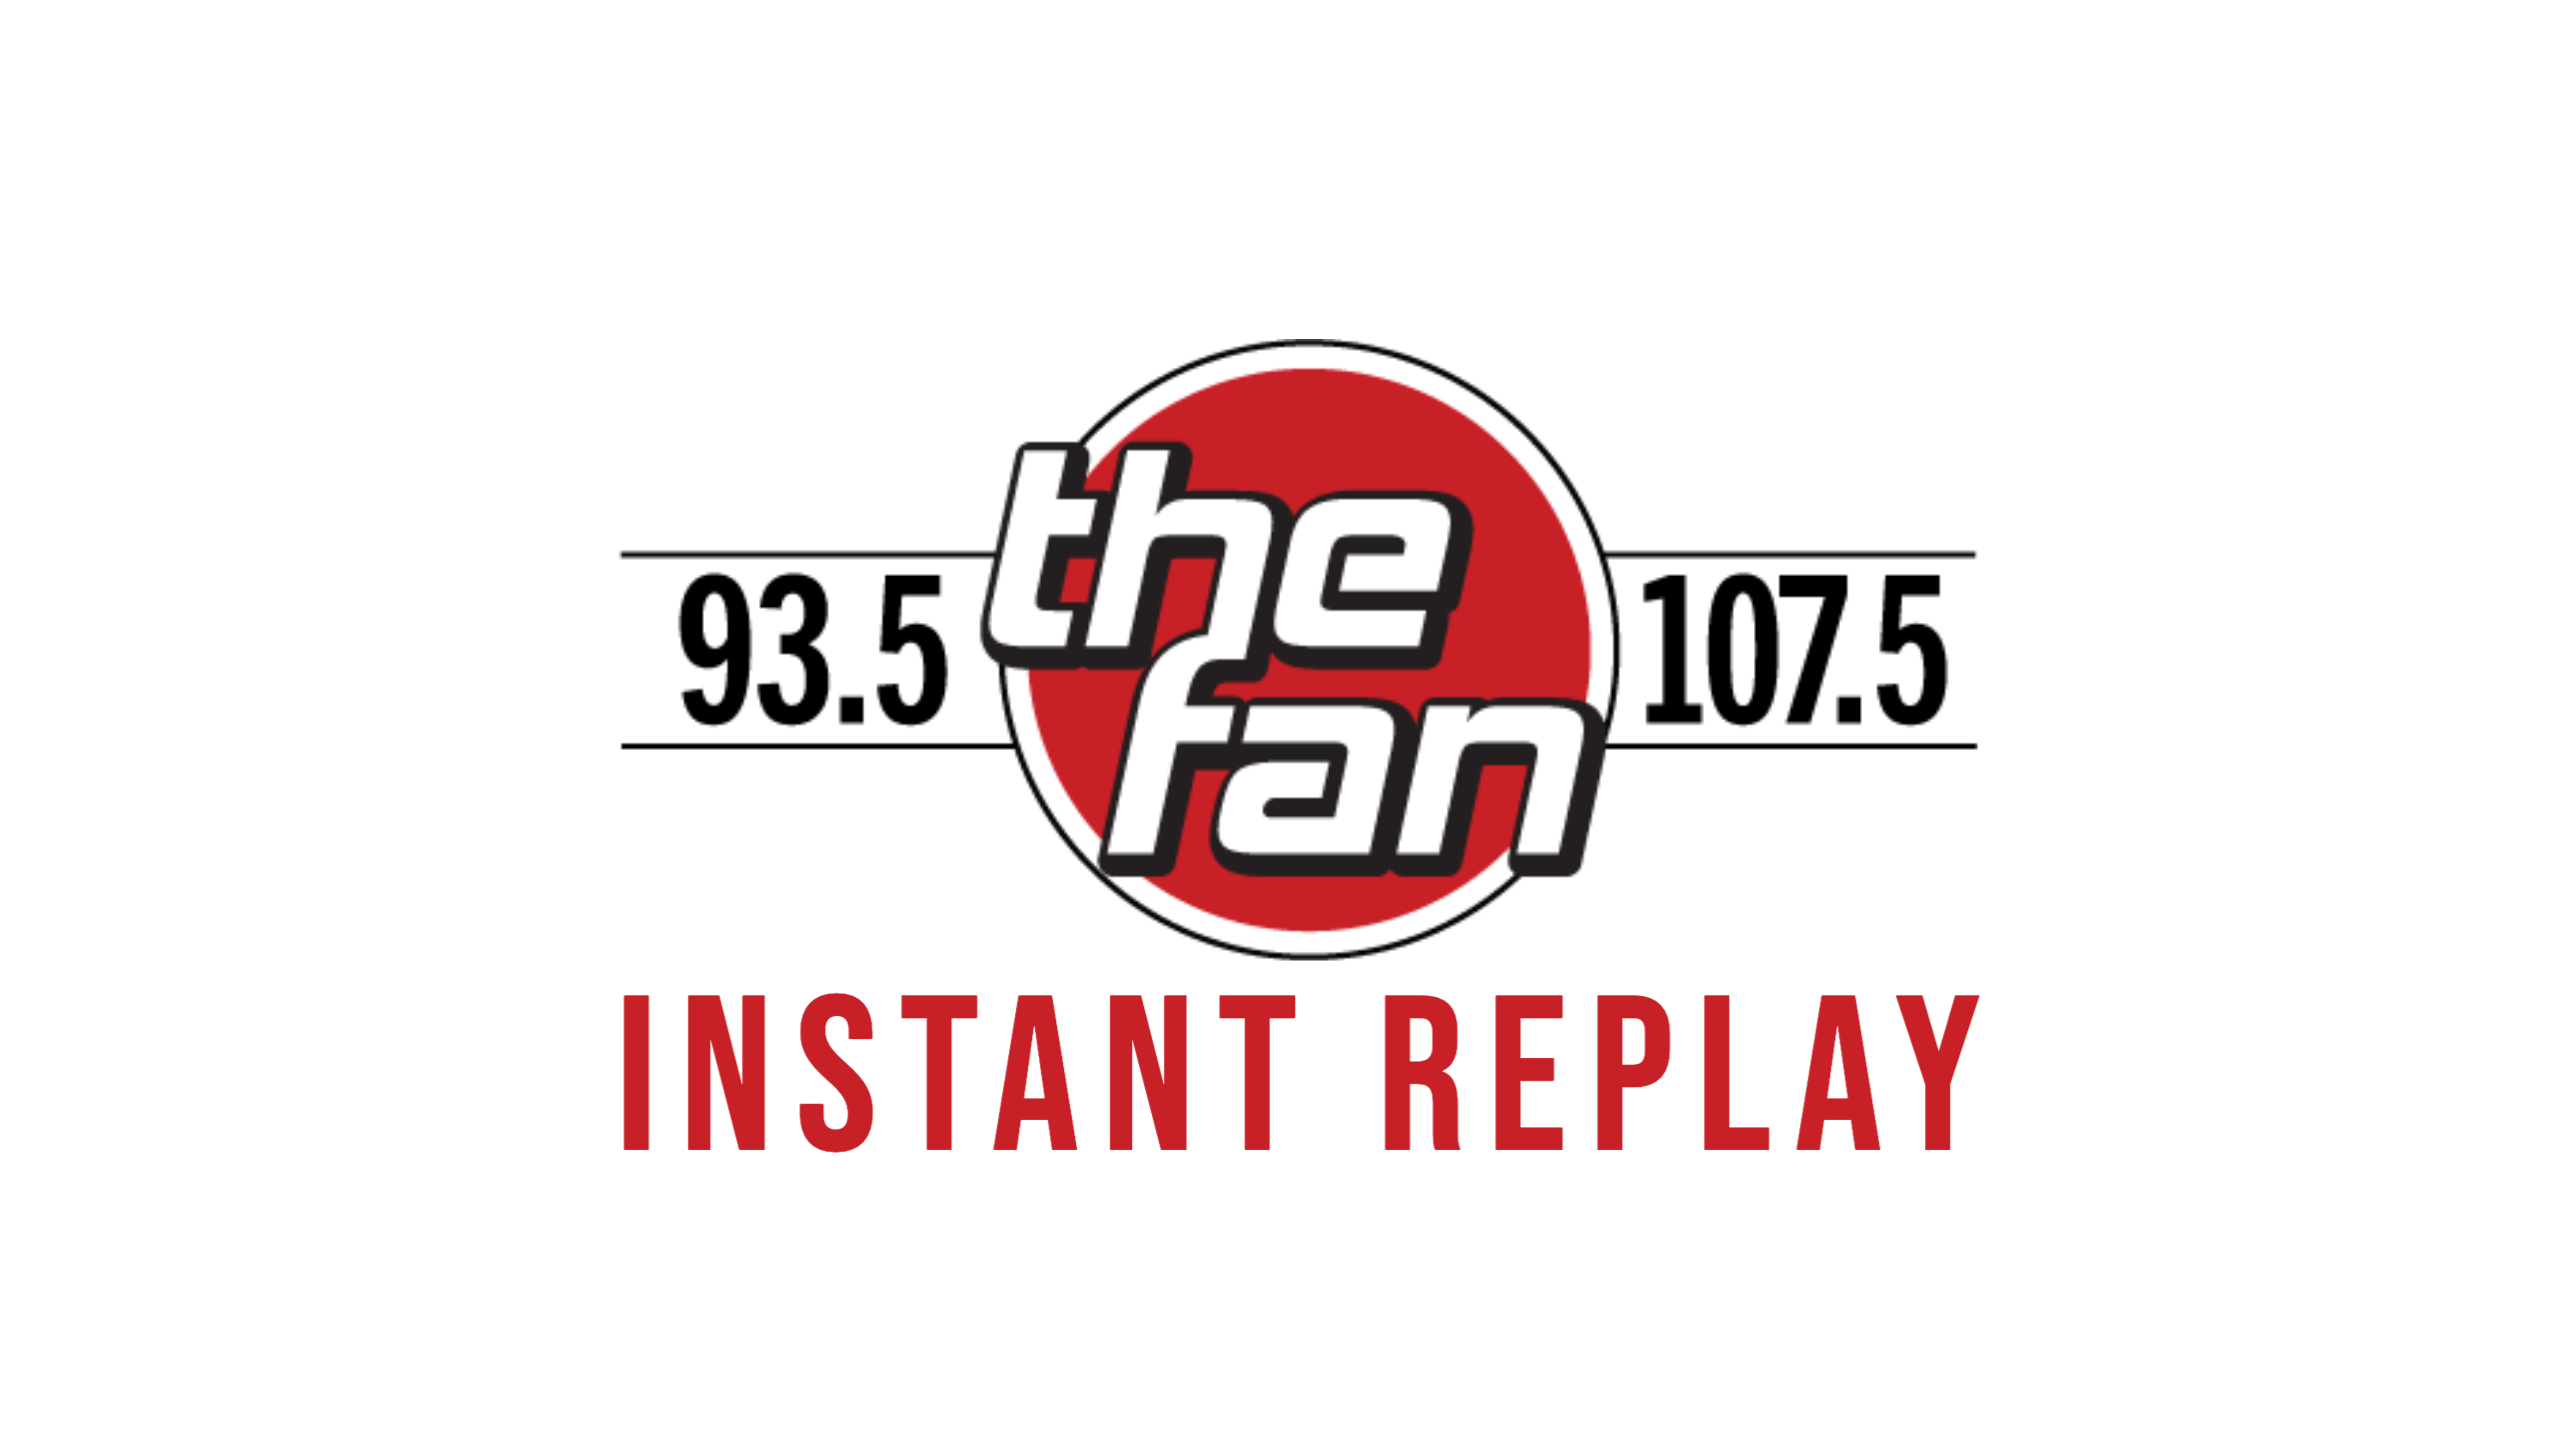 The Fan Instant replay